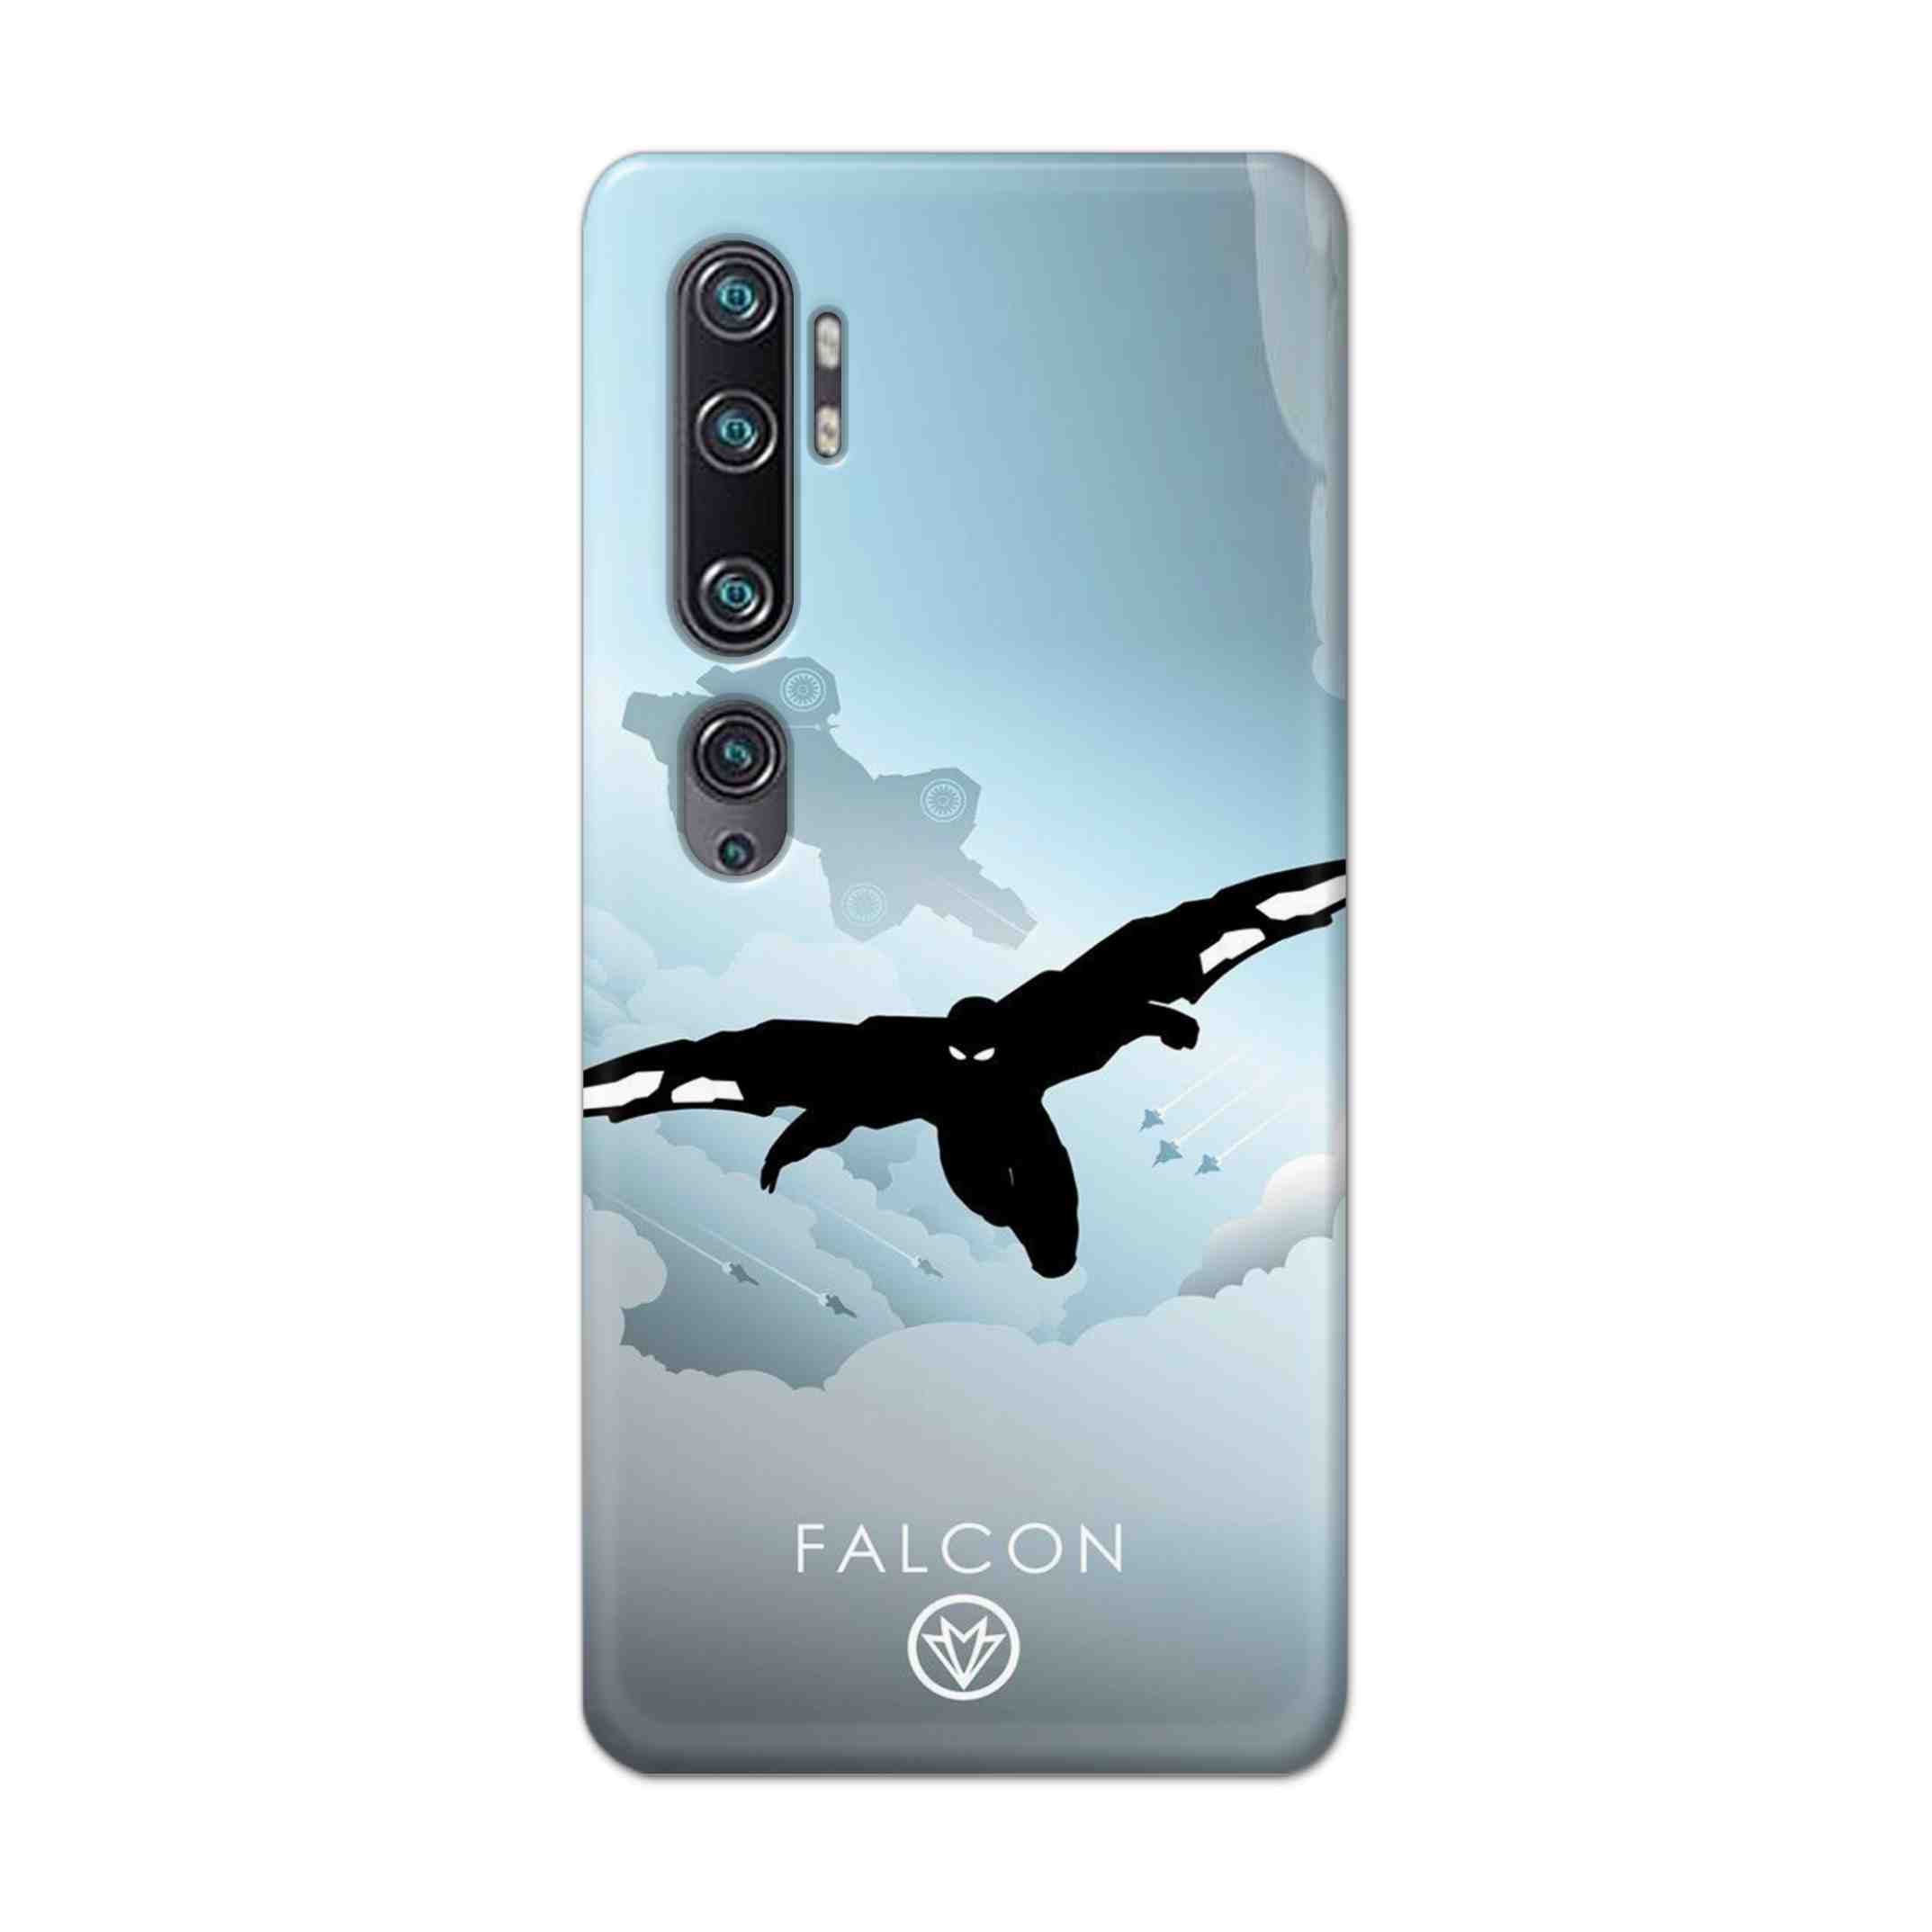 Buy Falcon Hard Back Mobile Phone Case Cover For Xiaomi Mi Note 10 Online